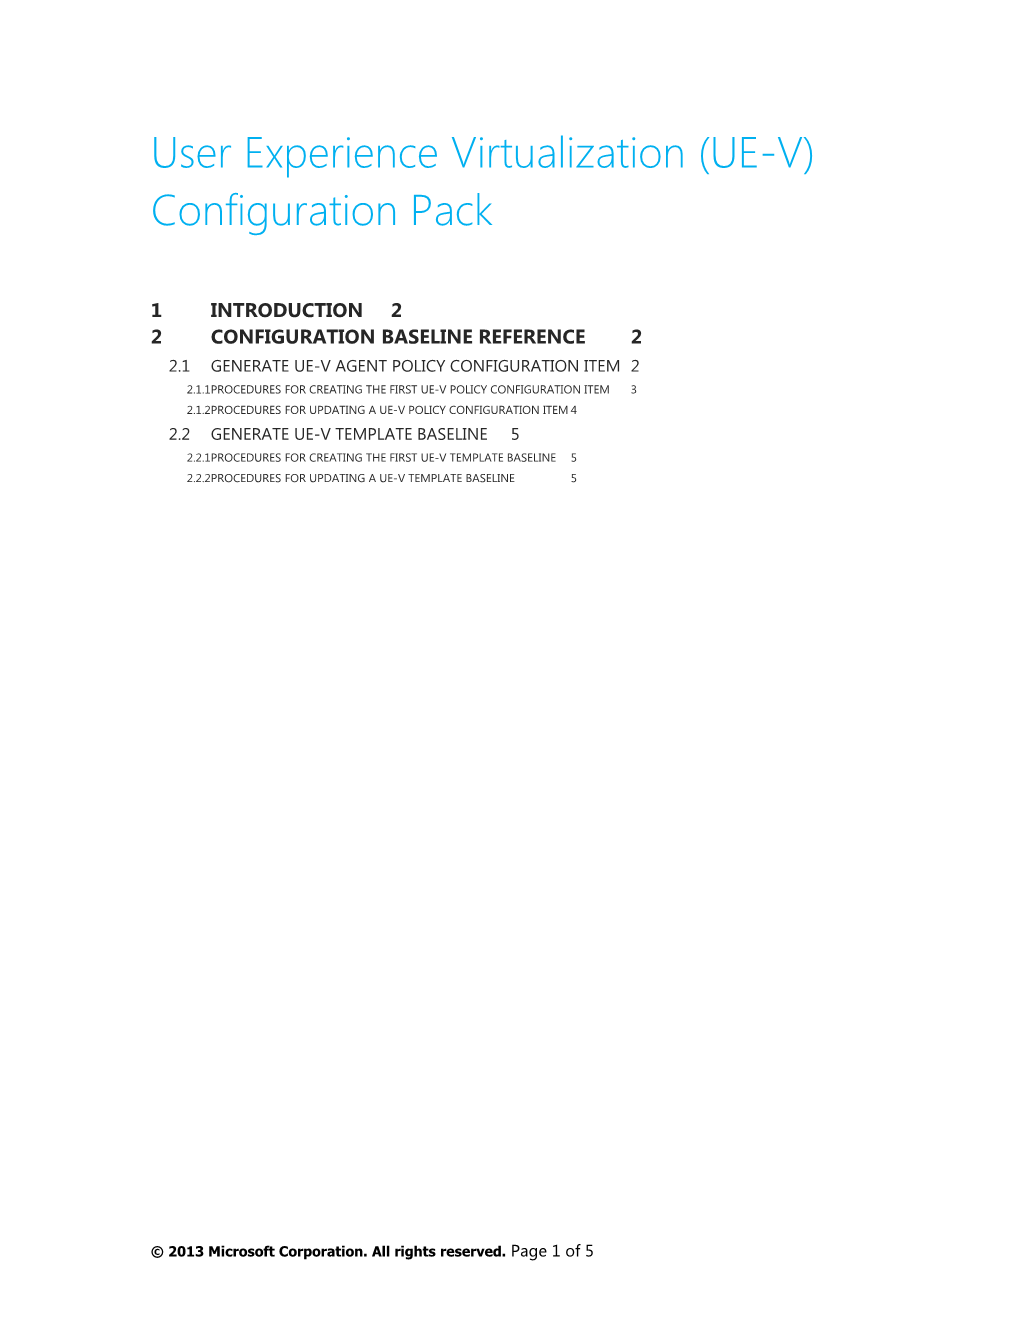 User Experience Virtualization (UE-V) Configuration Pack